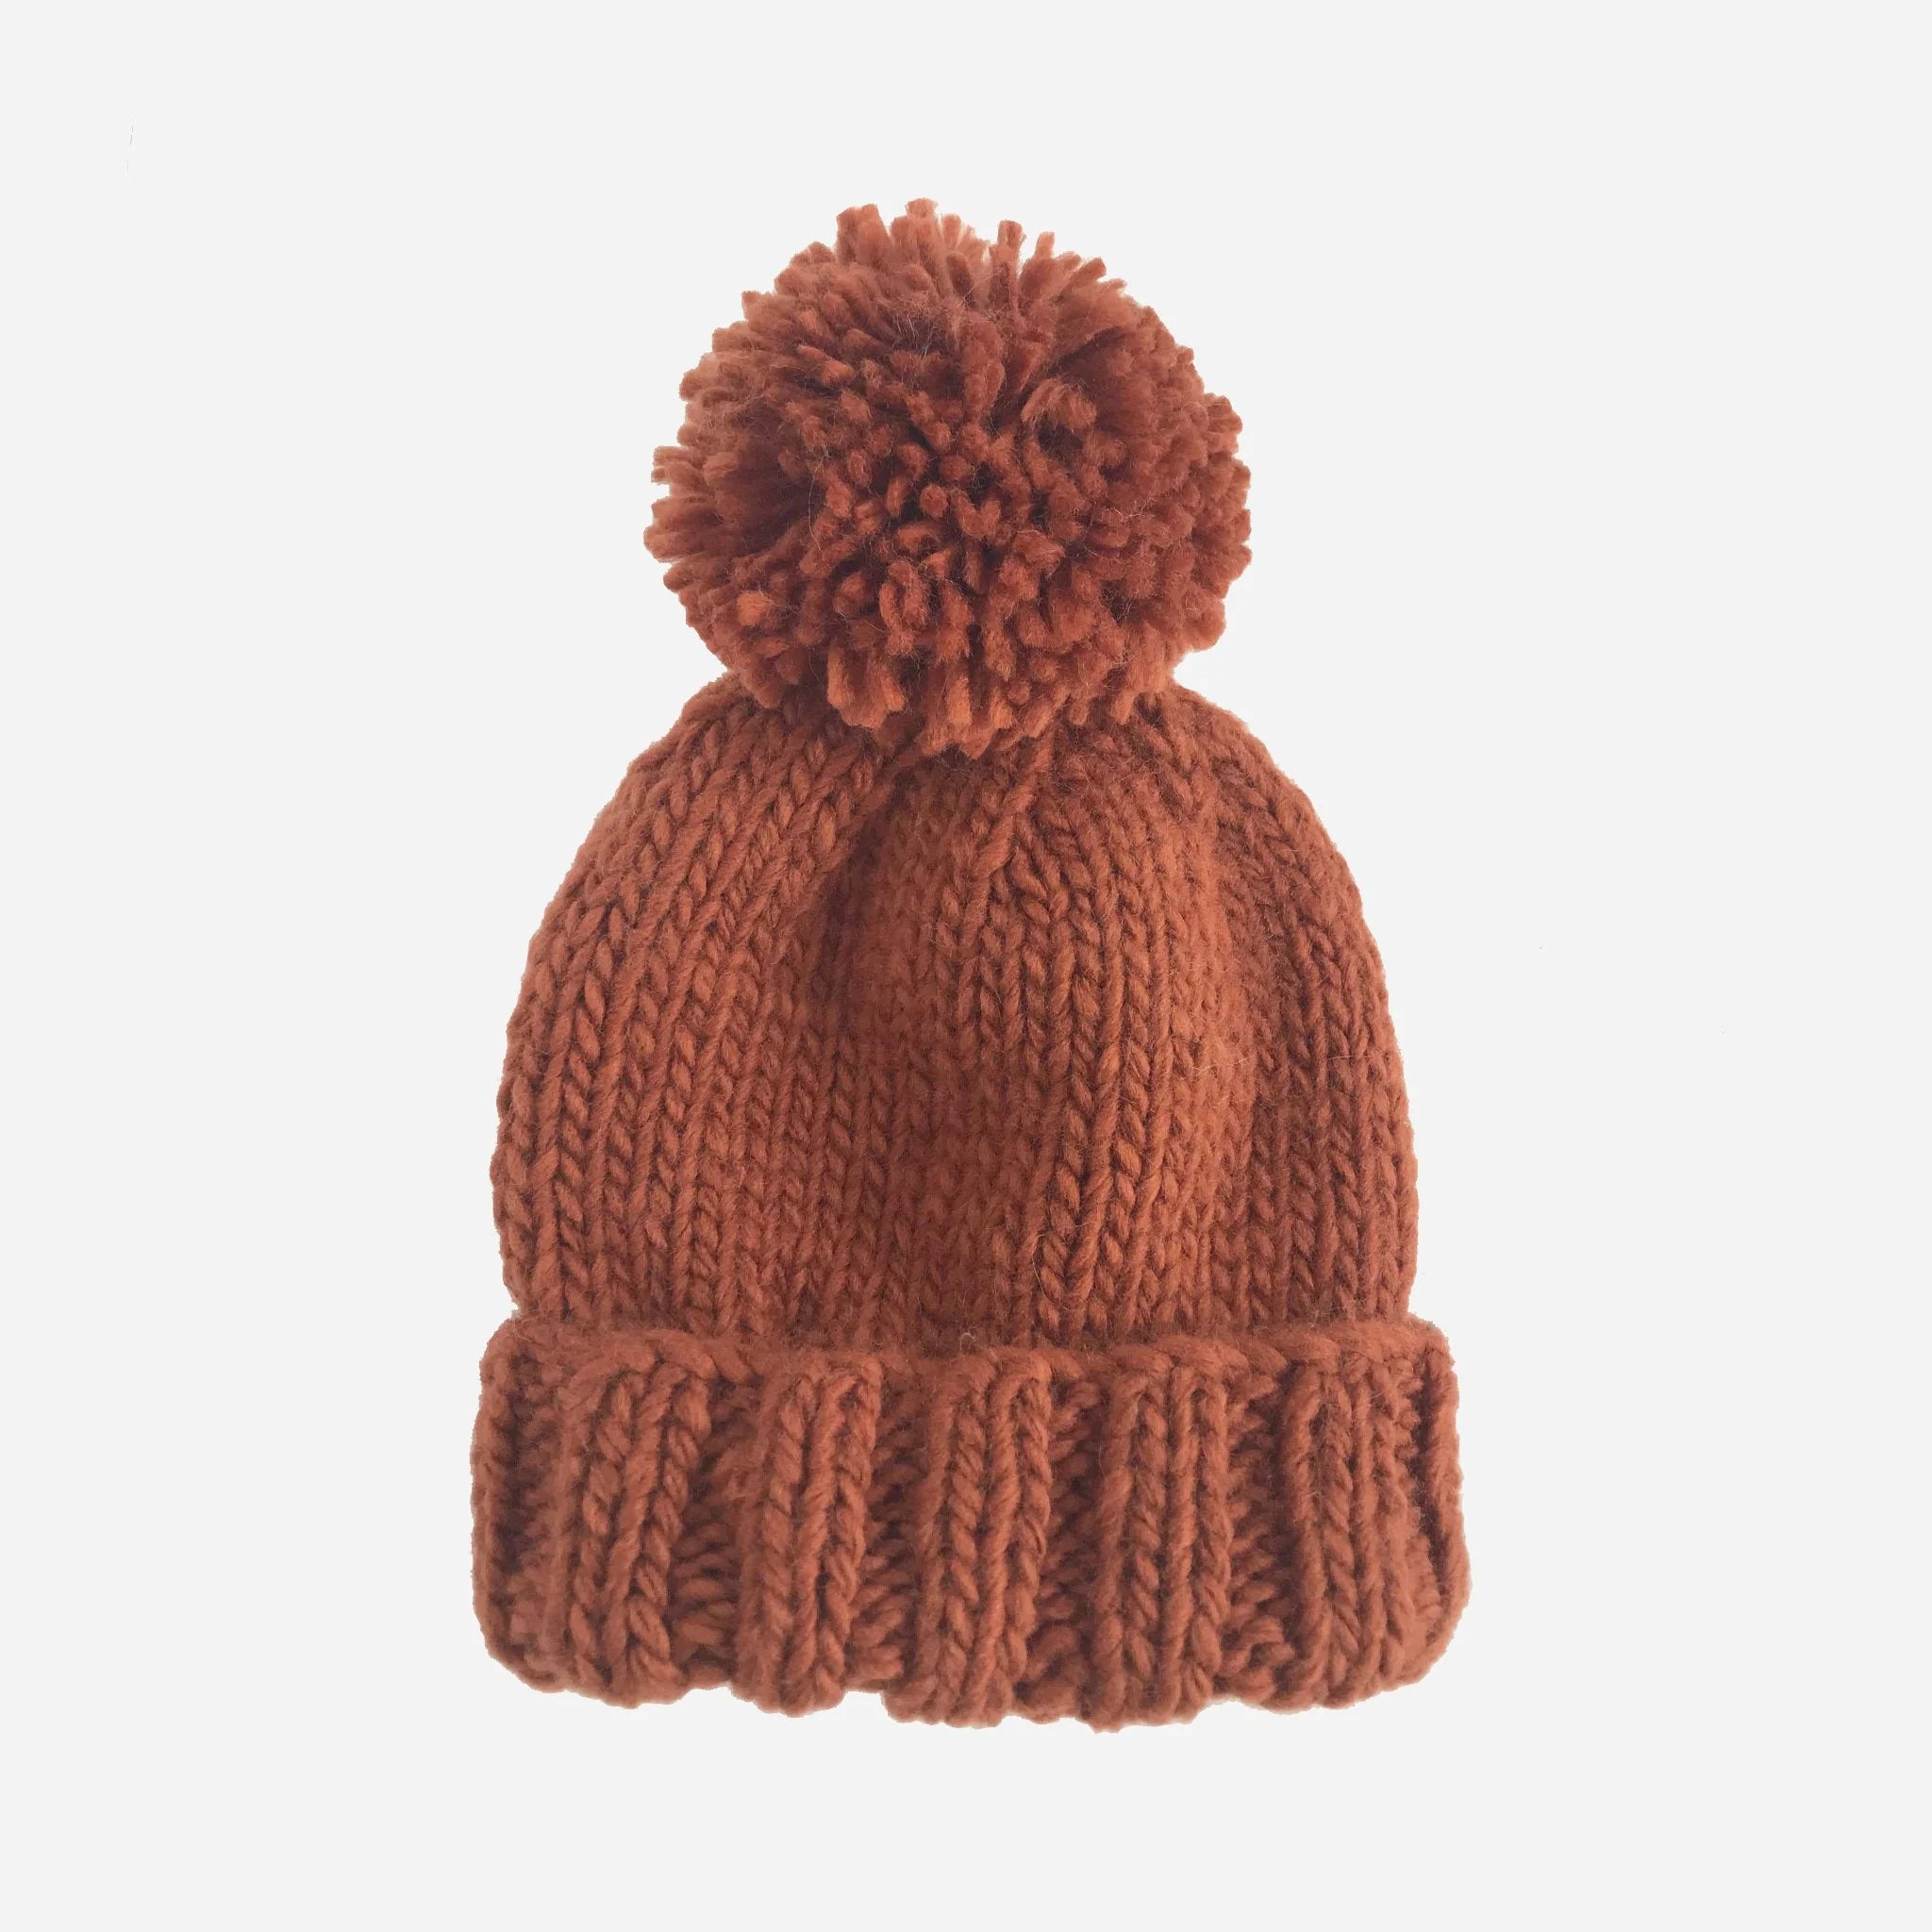 A reddish colored knit beanie with a pom pom on top.